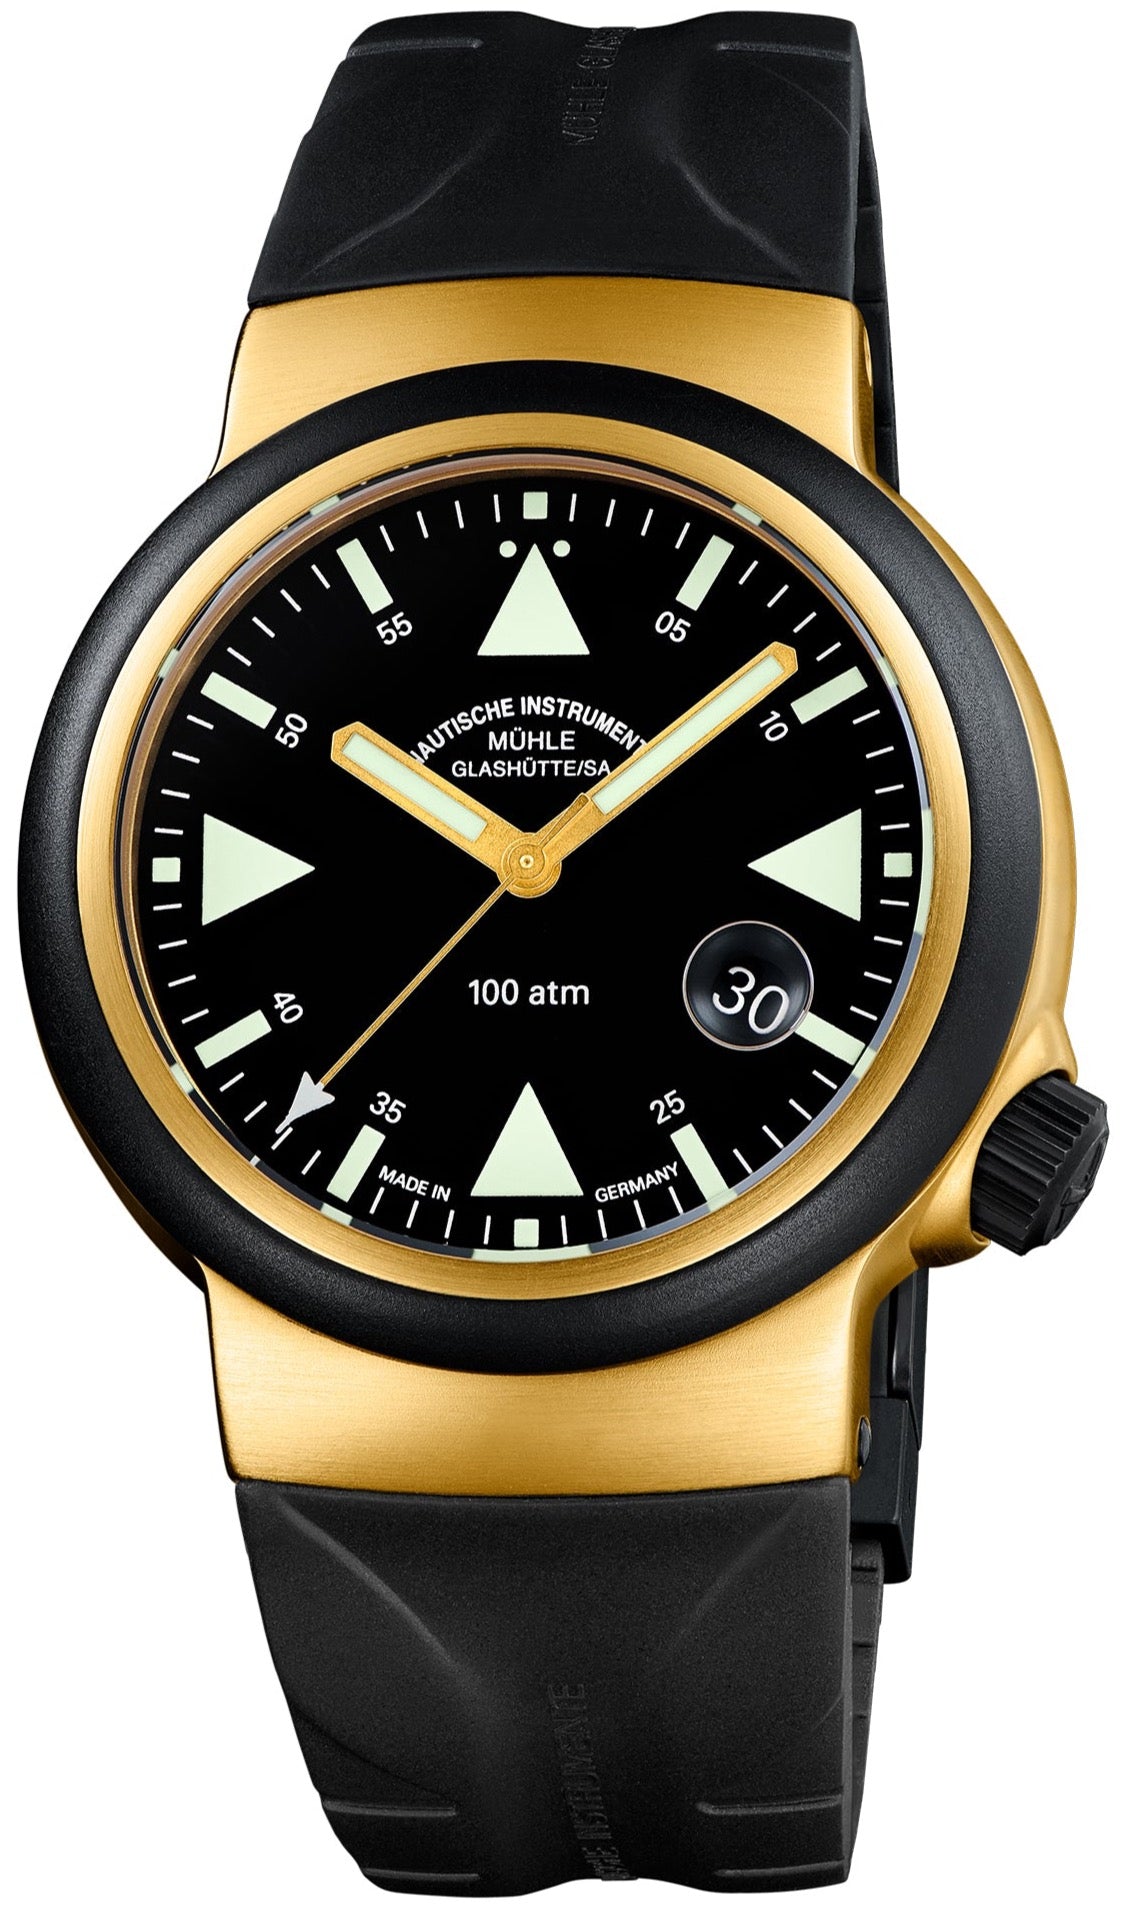 Muhle Glashutte Watch S.a.r. Rescue Timer Gold Special Edition